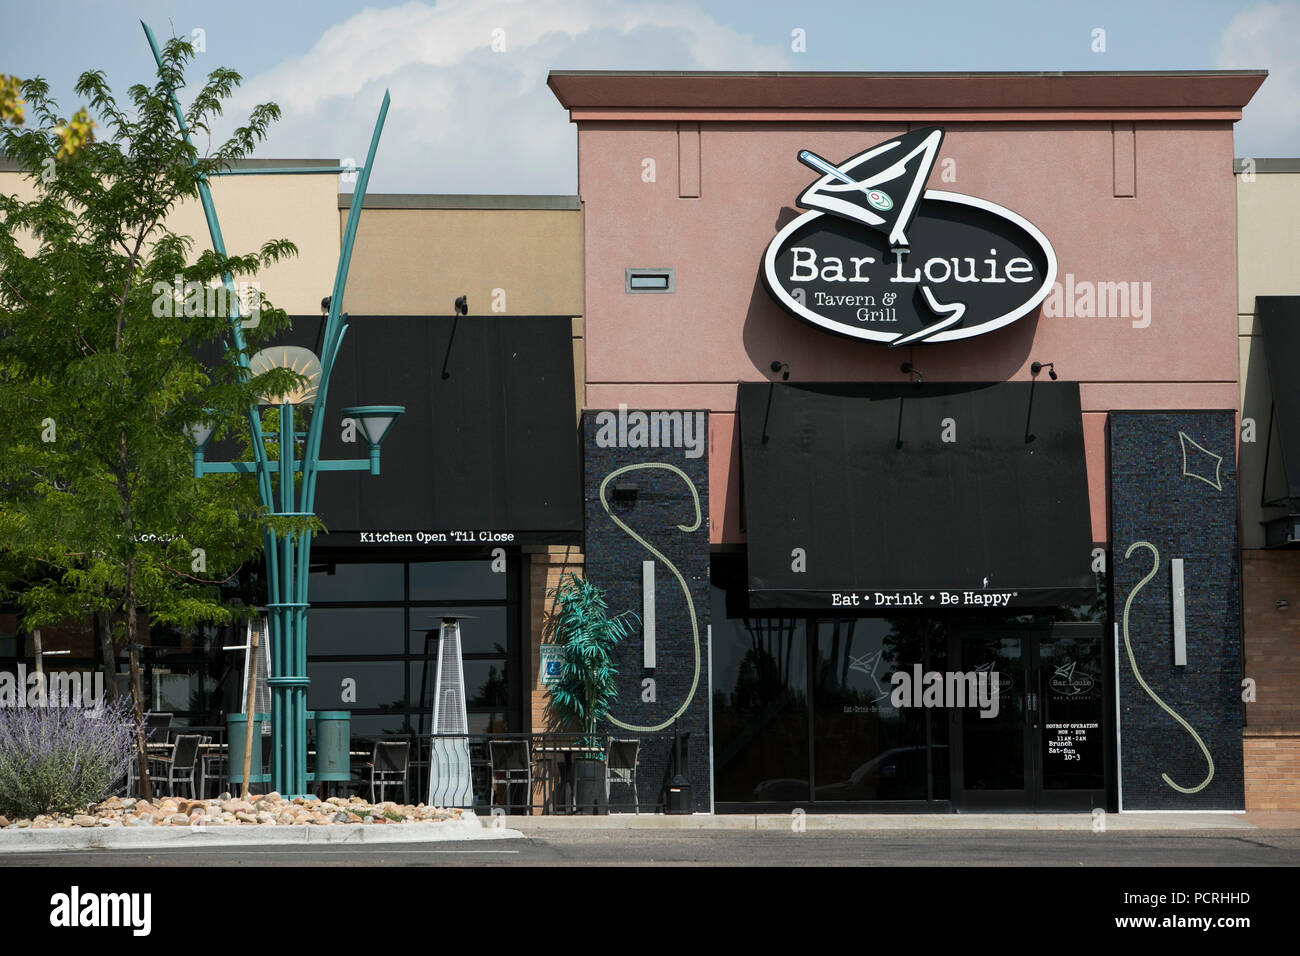 A logo sign outside of a Bar Louie restaurant location in Westminster, Colorado, on July 23, 2018. Stock Photo